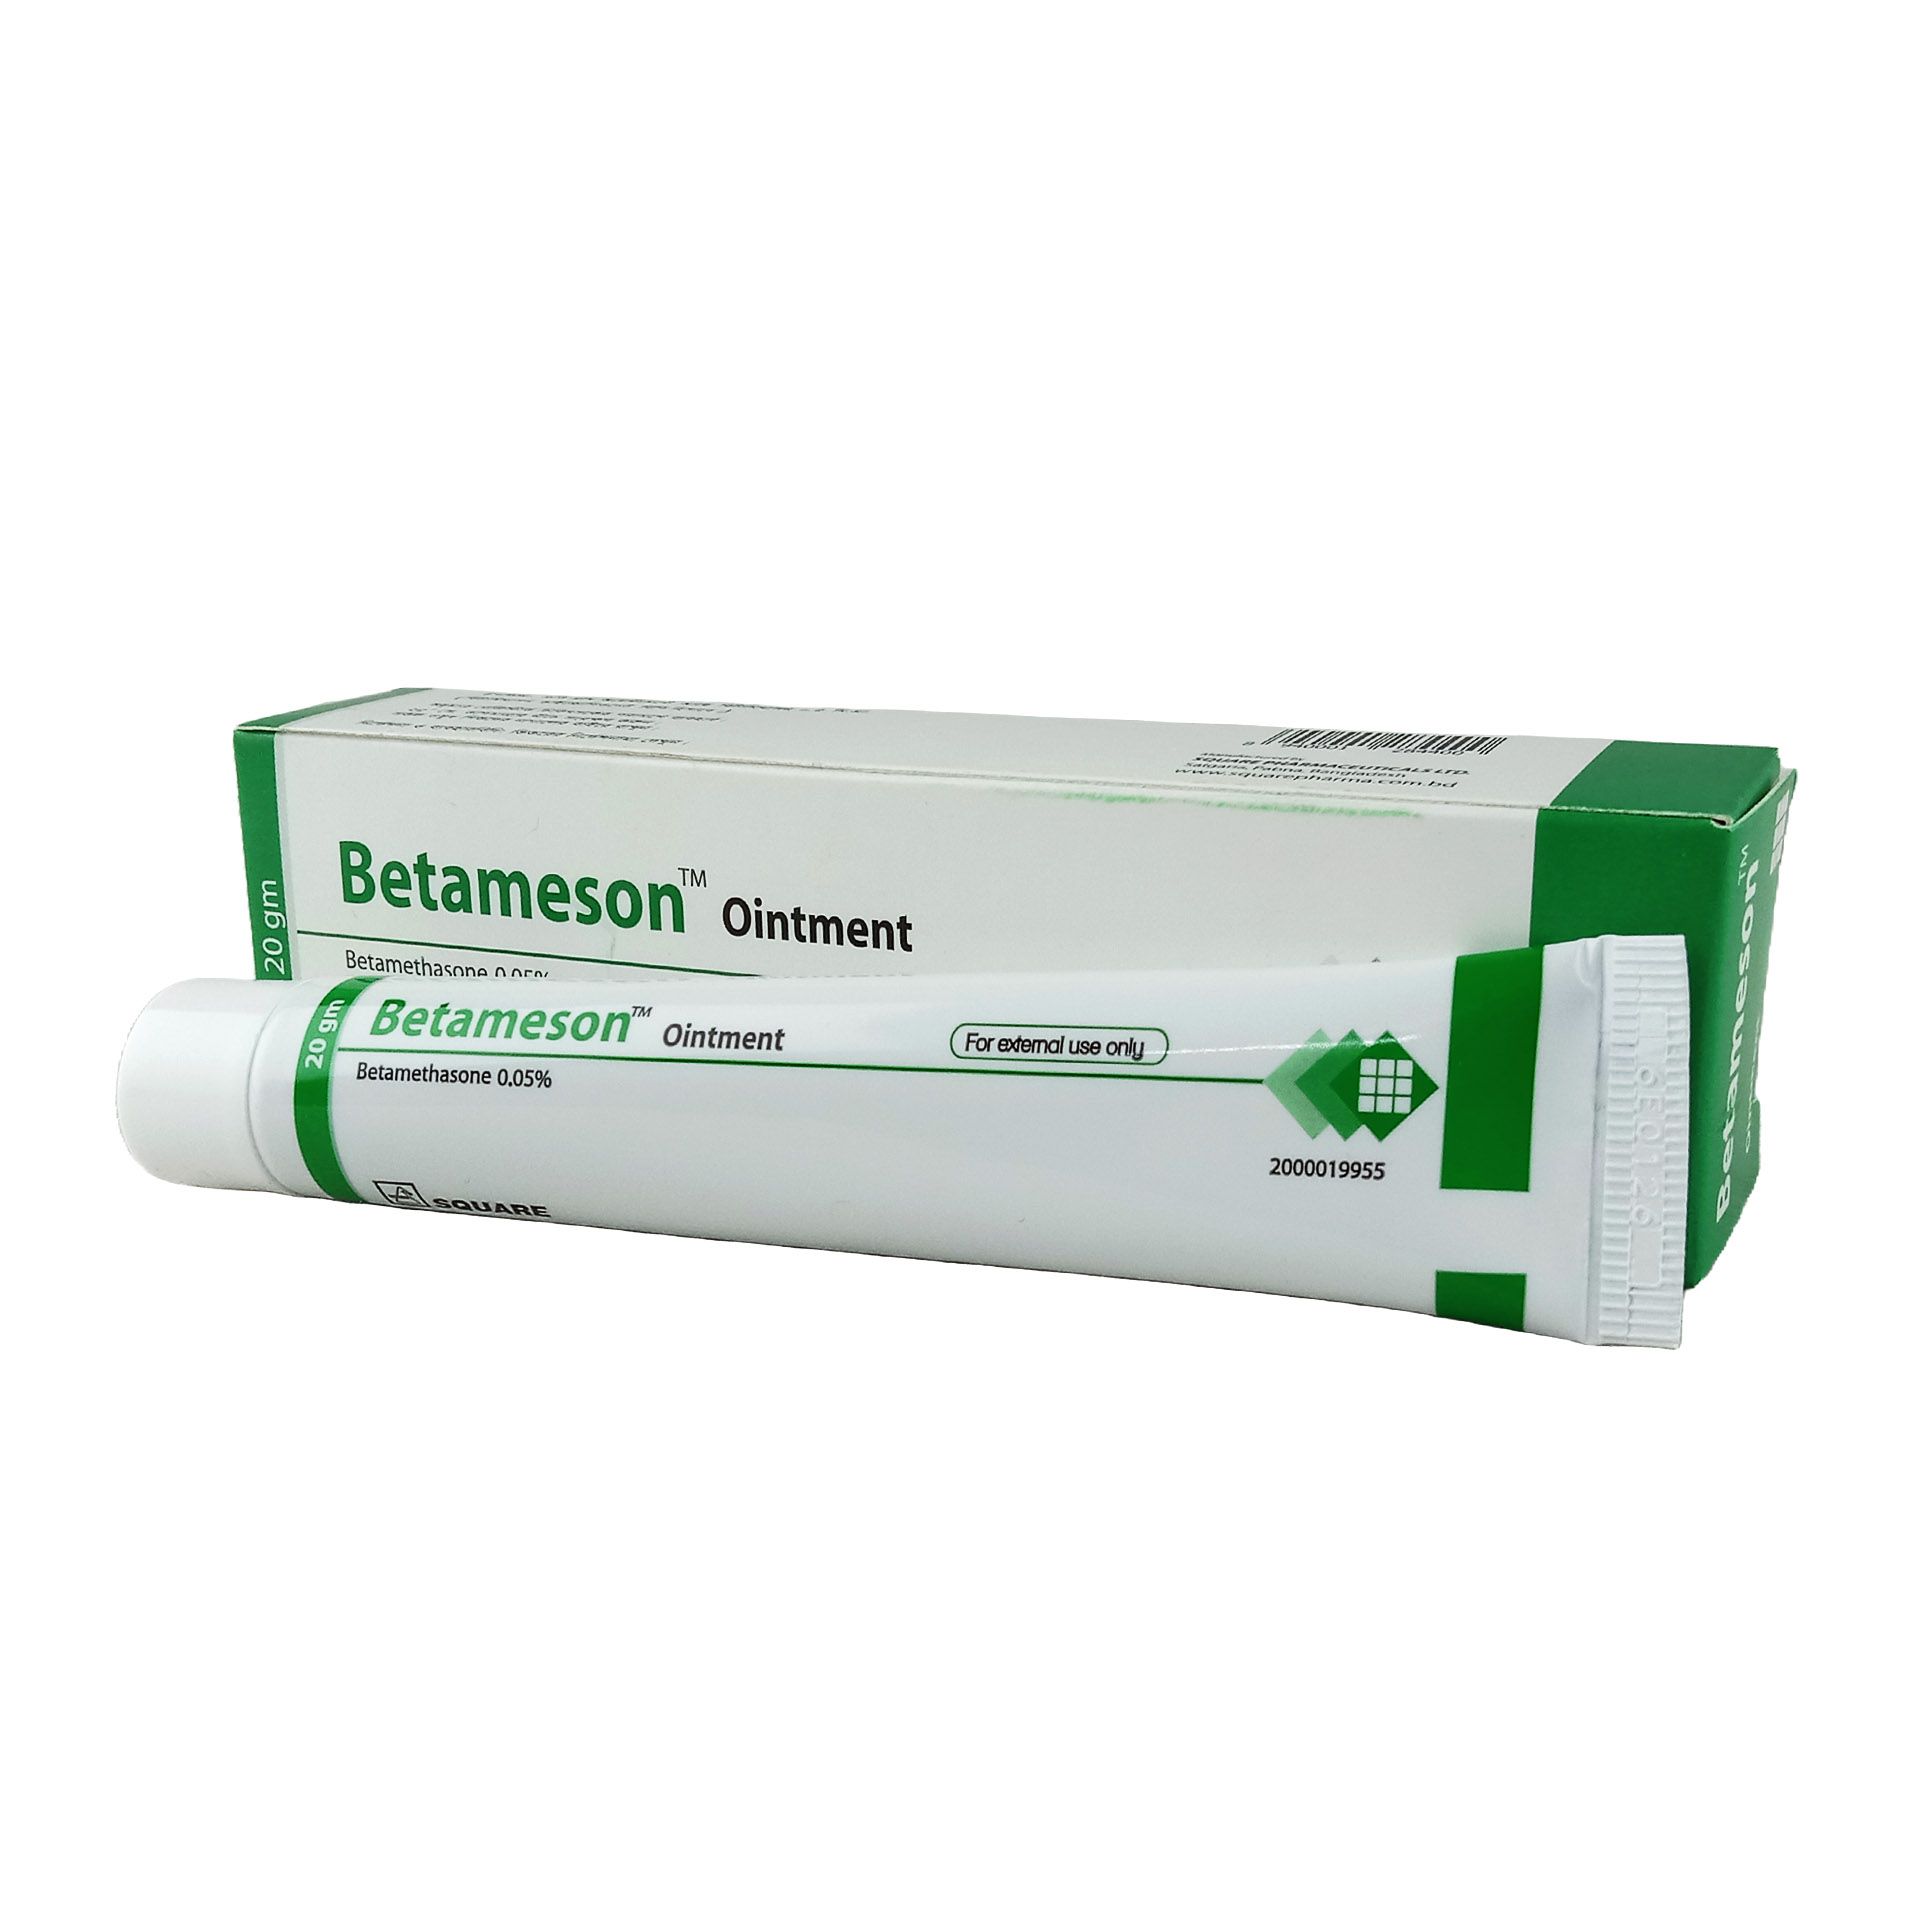 Betameson Ointment 0.05% Ointment